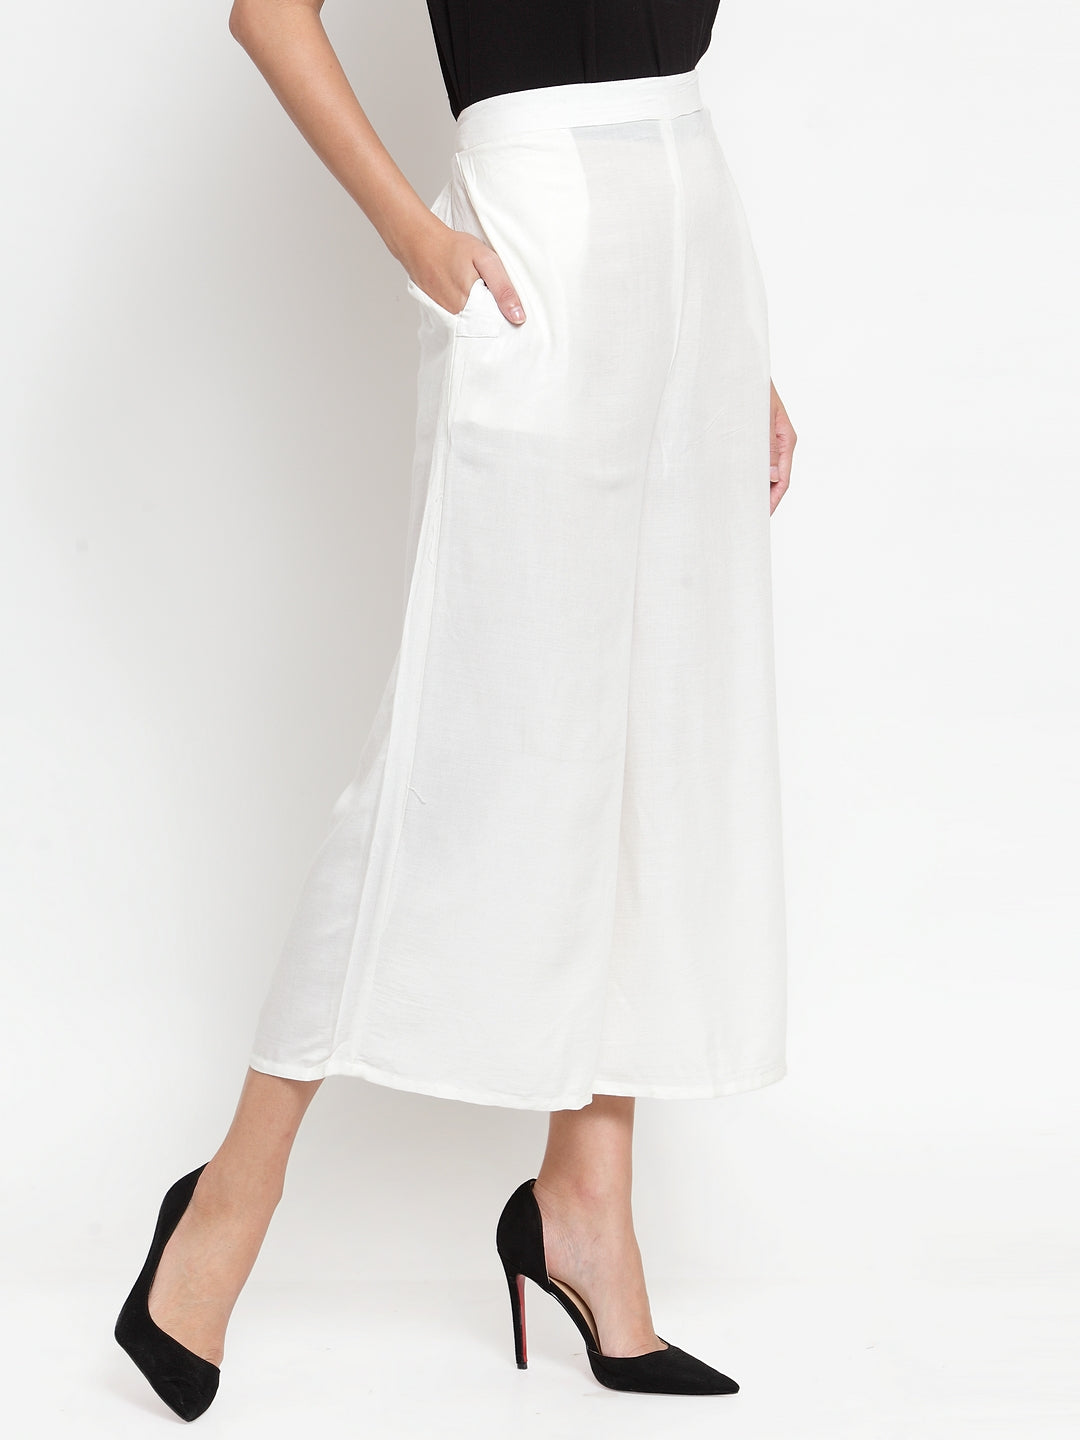 Women's Off-White Solid Rayon Culottes - Wahe-NOOR